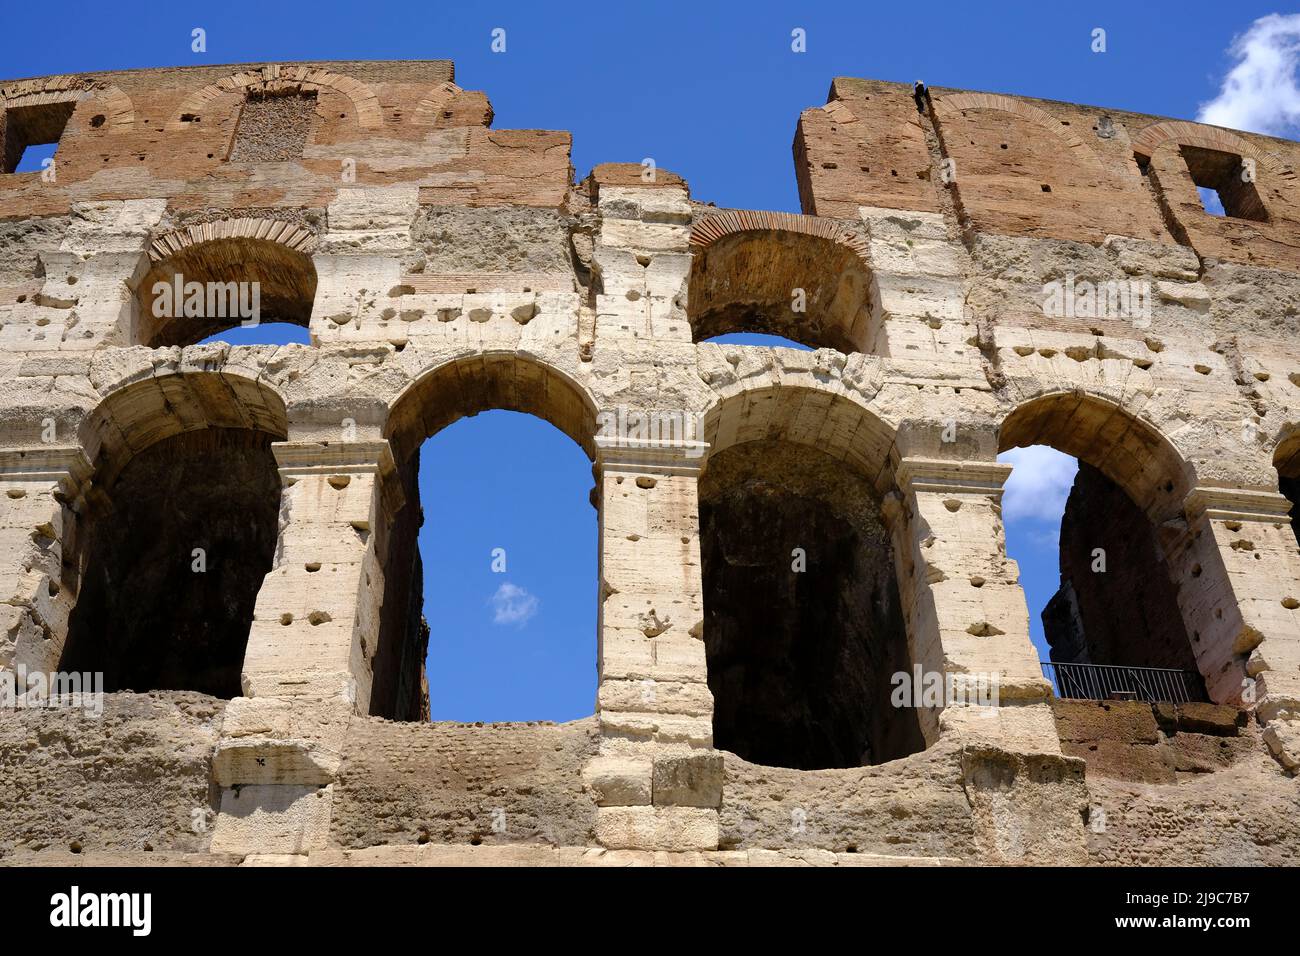 Exterior of the Roman Colosseum in Rome, Italy Stock Photo